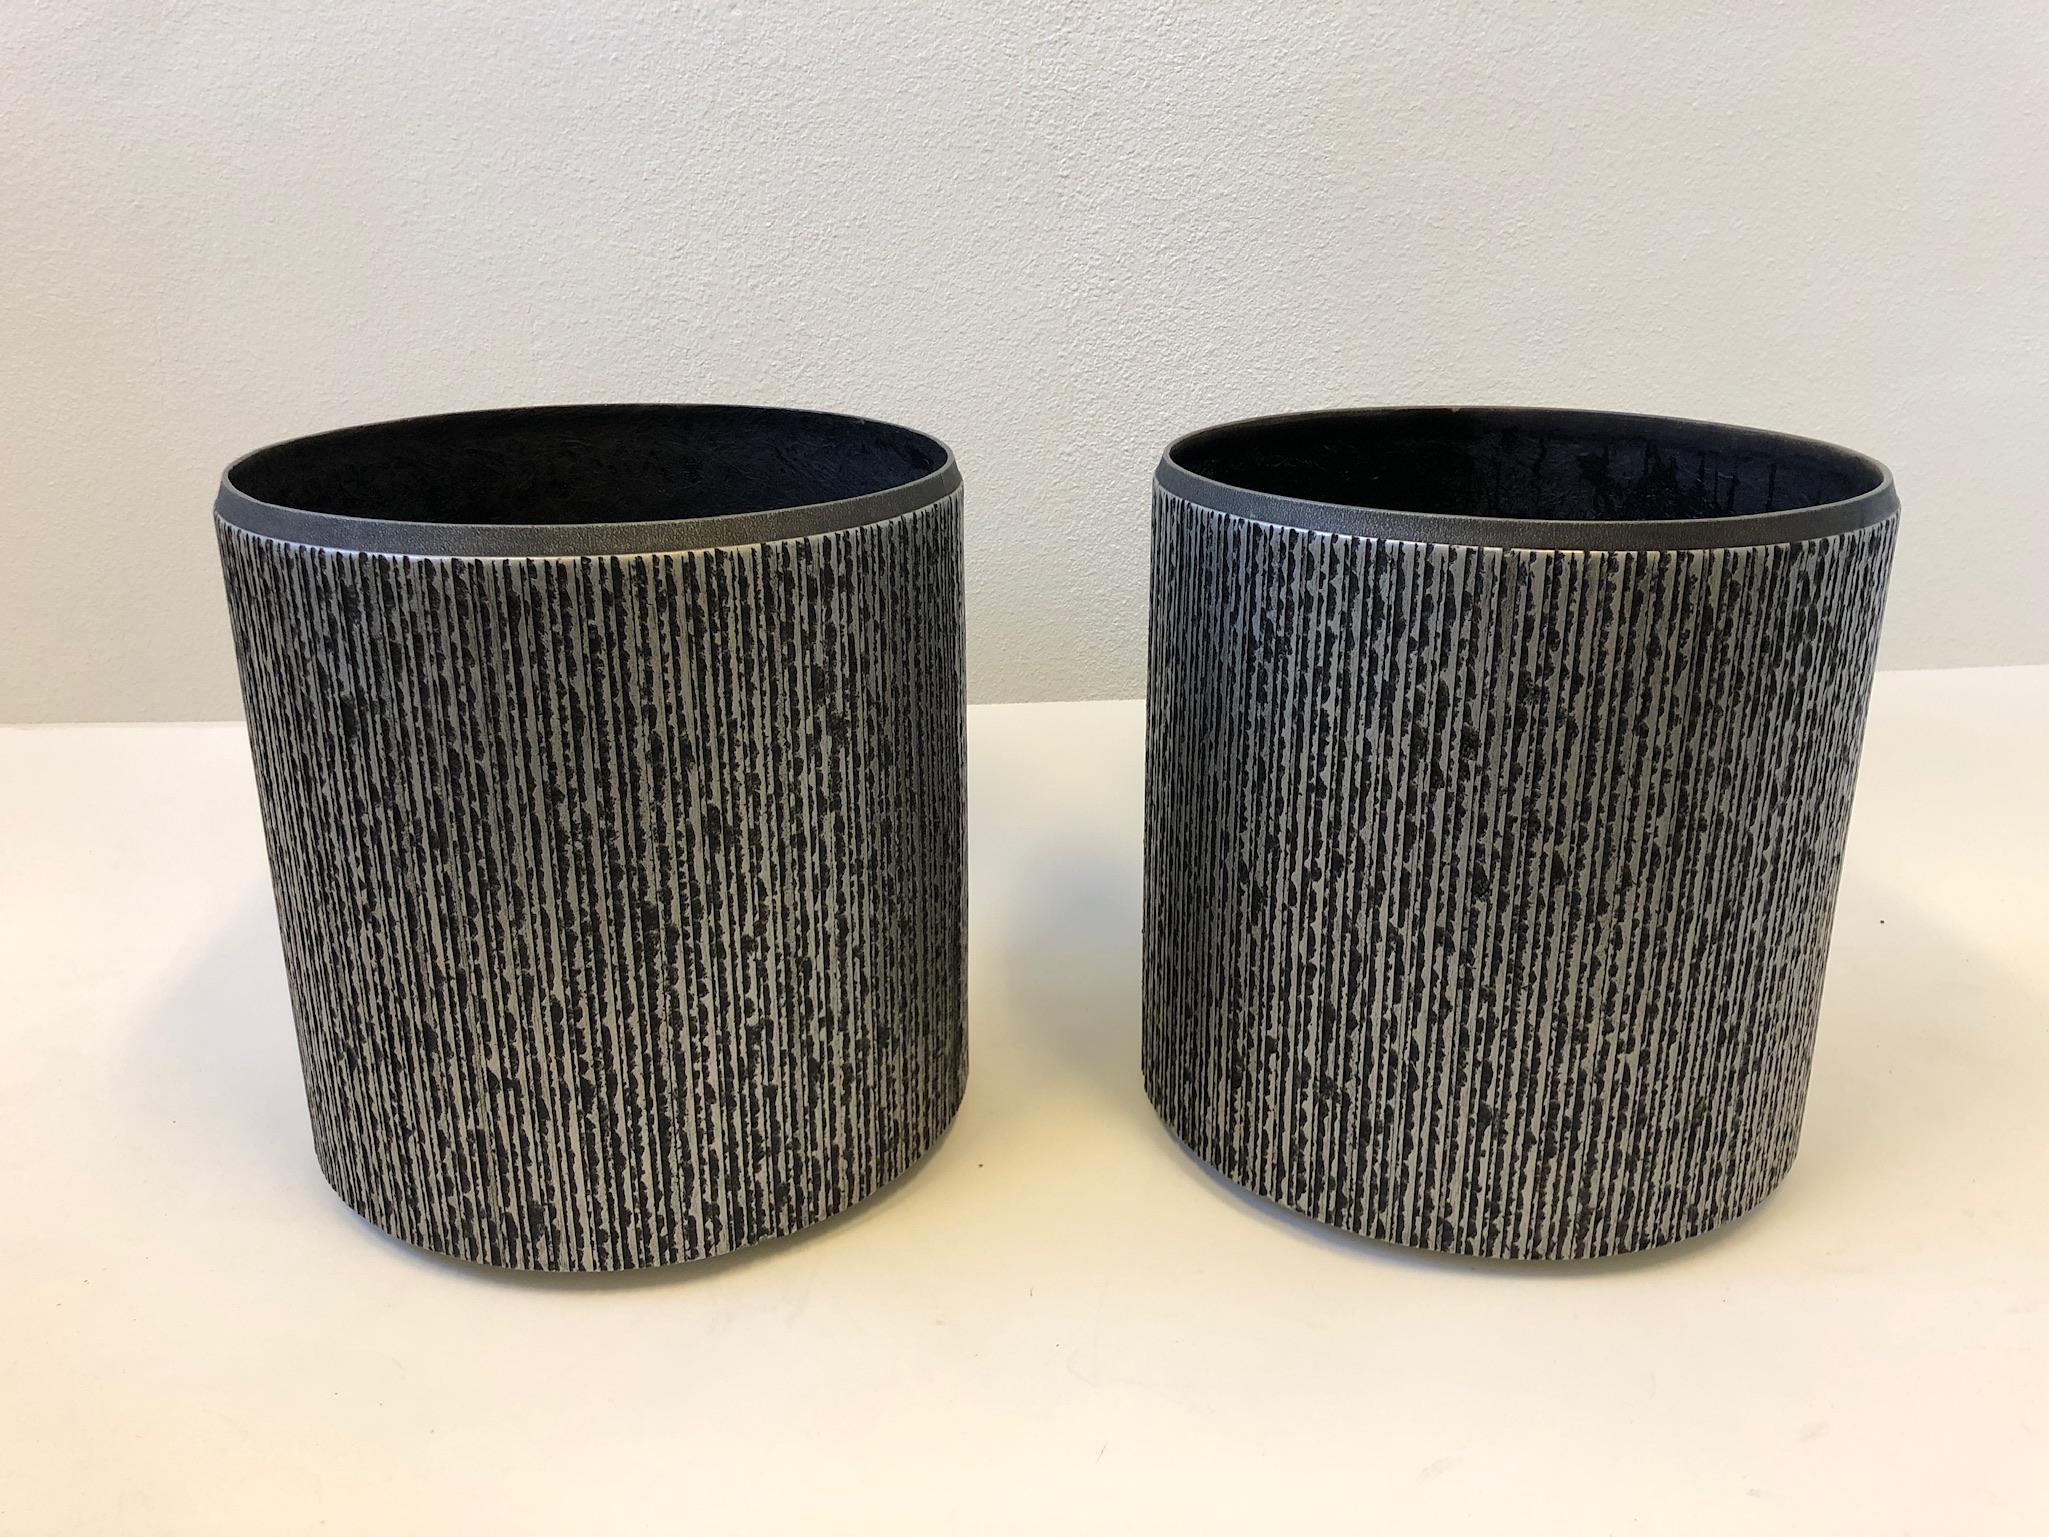 Pair of Brutalist Silver and Black Architectural Planters by Forms and Surfaces 1